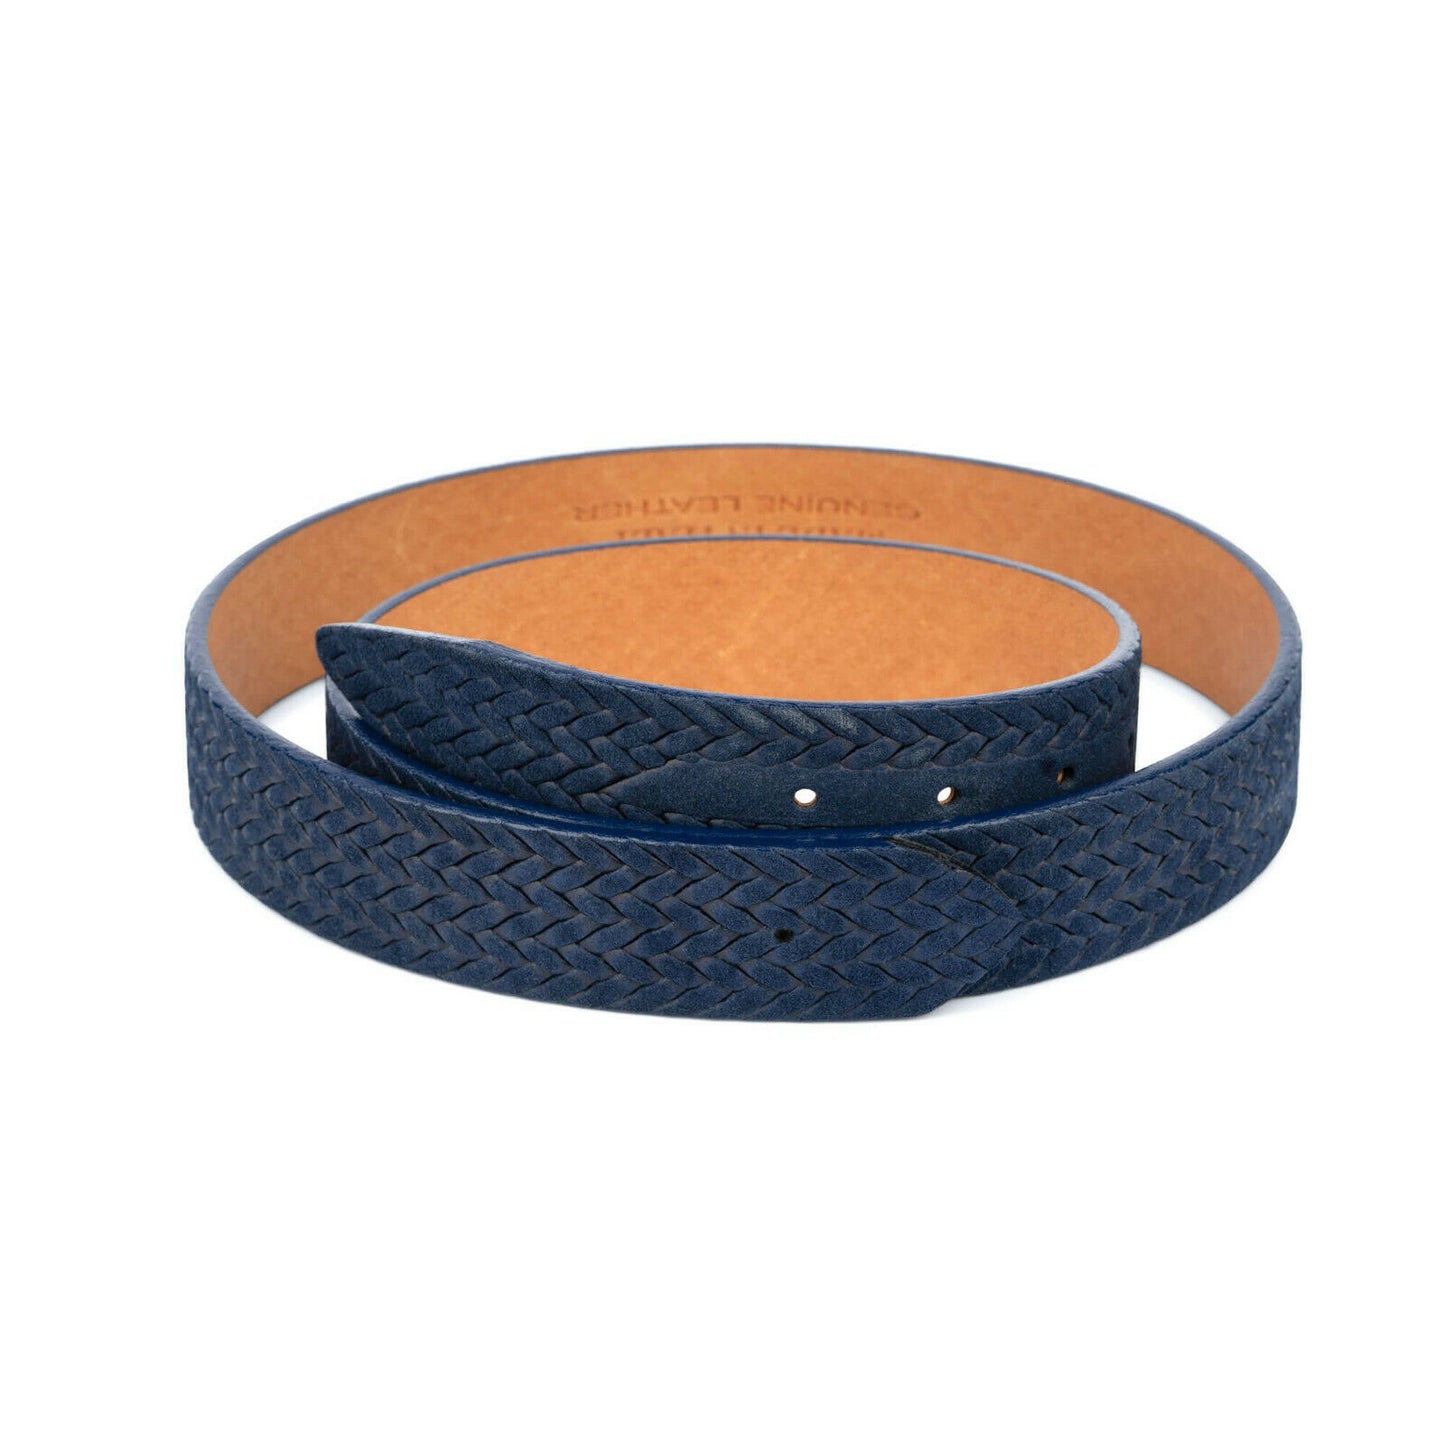 Blue Suede Belt Strap For Fendi Buckles 35 Mm Woven Embossed Womens Mens Real